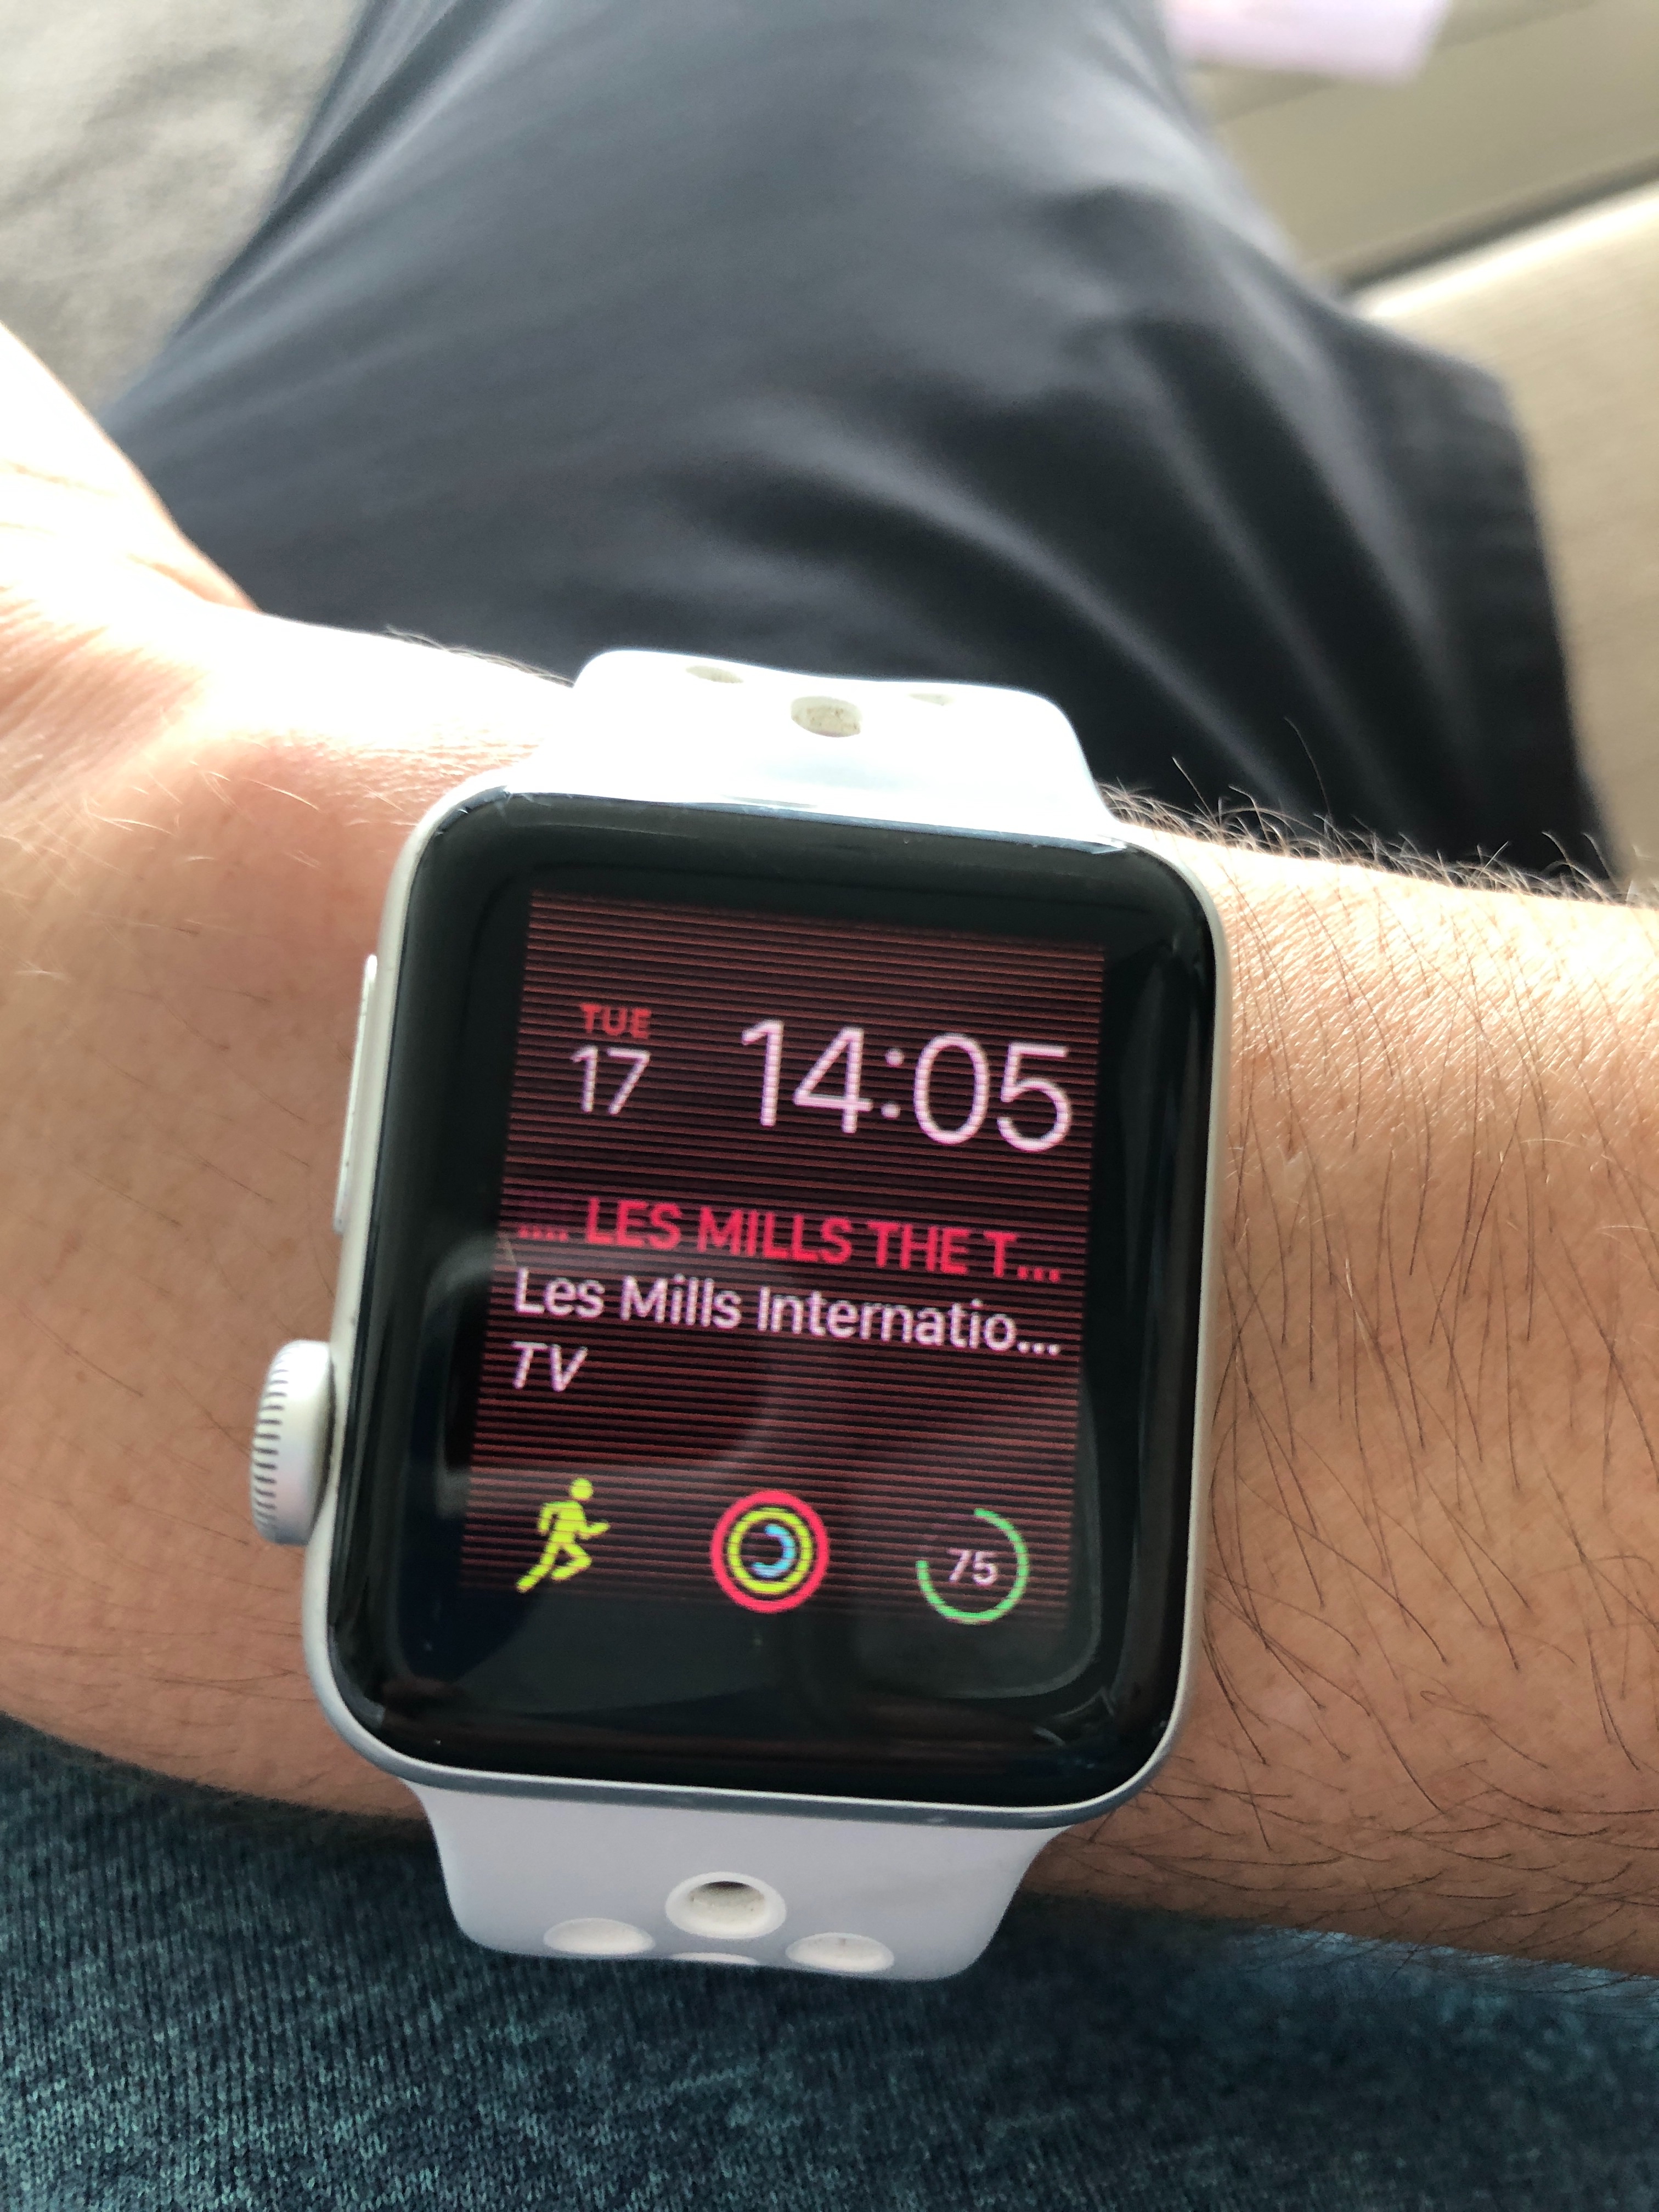 Soar kaos Om indstilling Apple Watch displaying red and pixelly - Apple Community